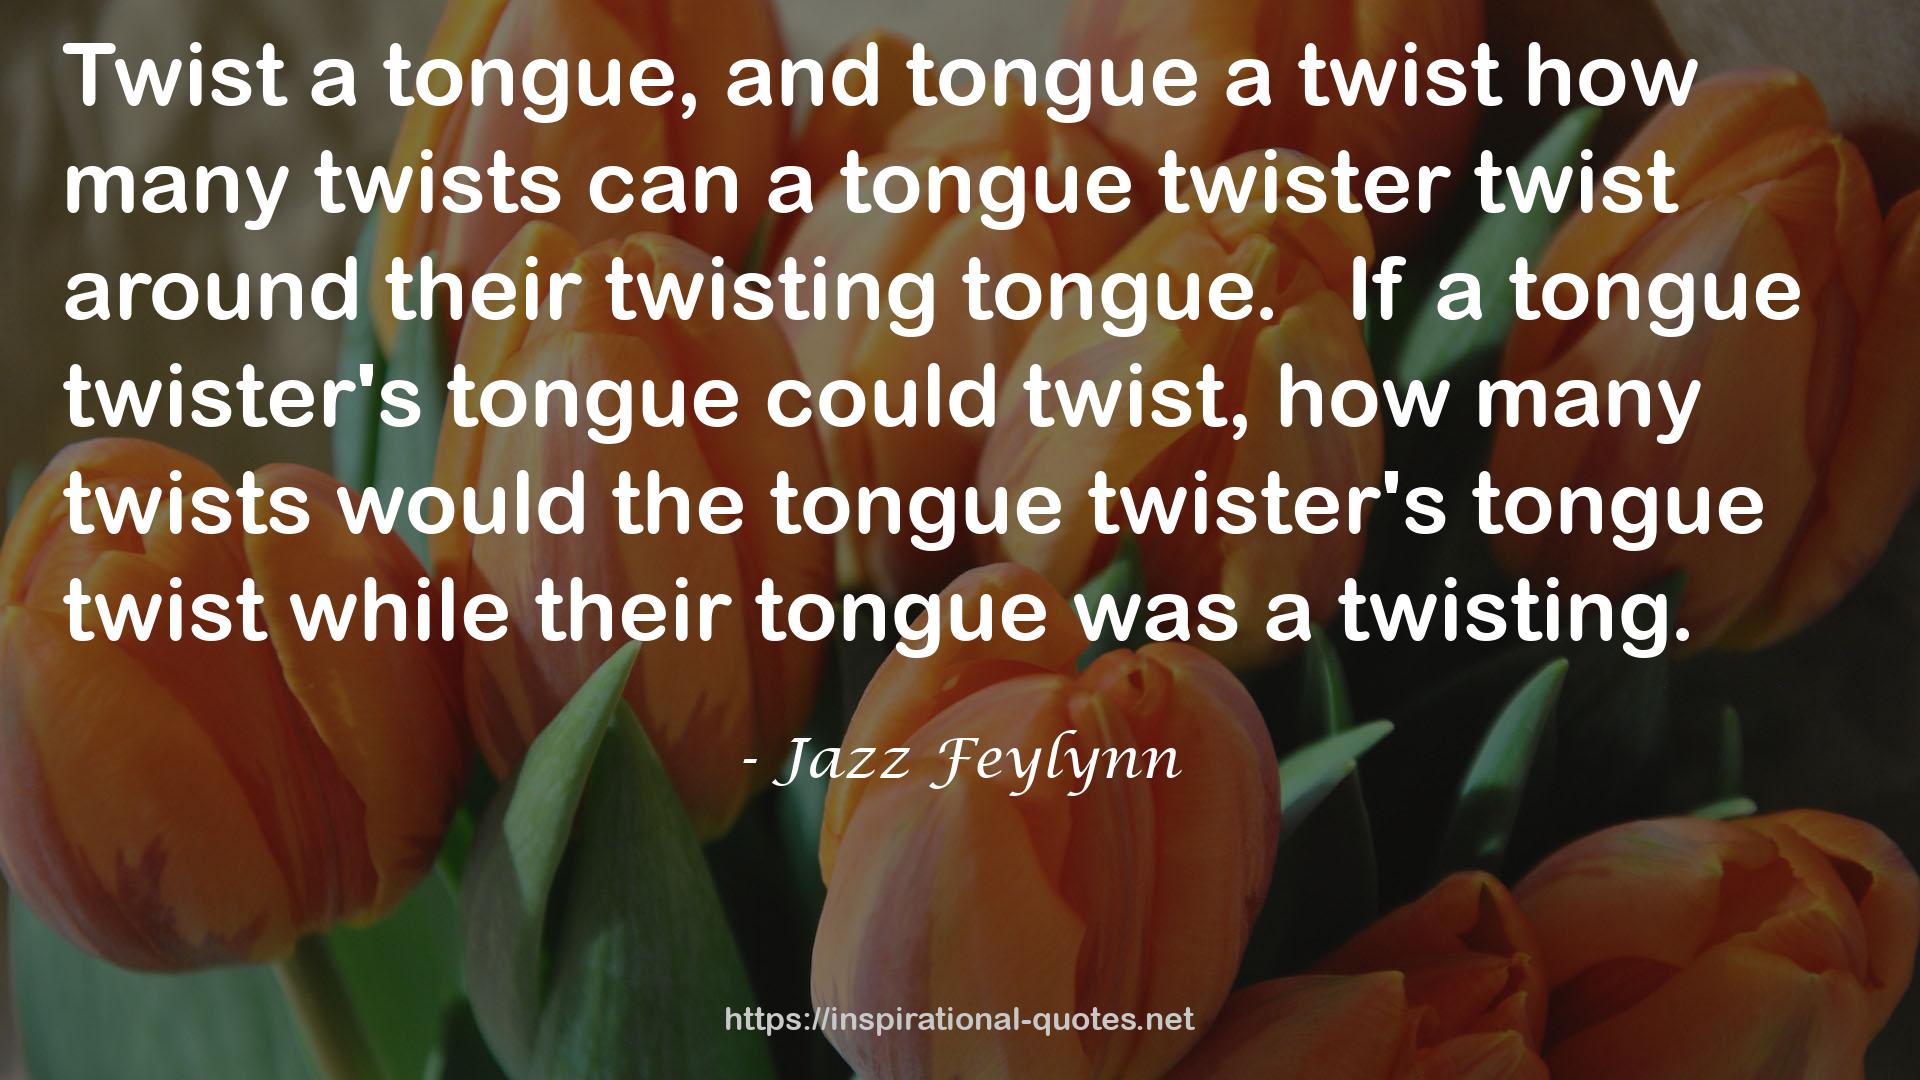 the tongue twister's tongue twist  QUOTES